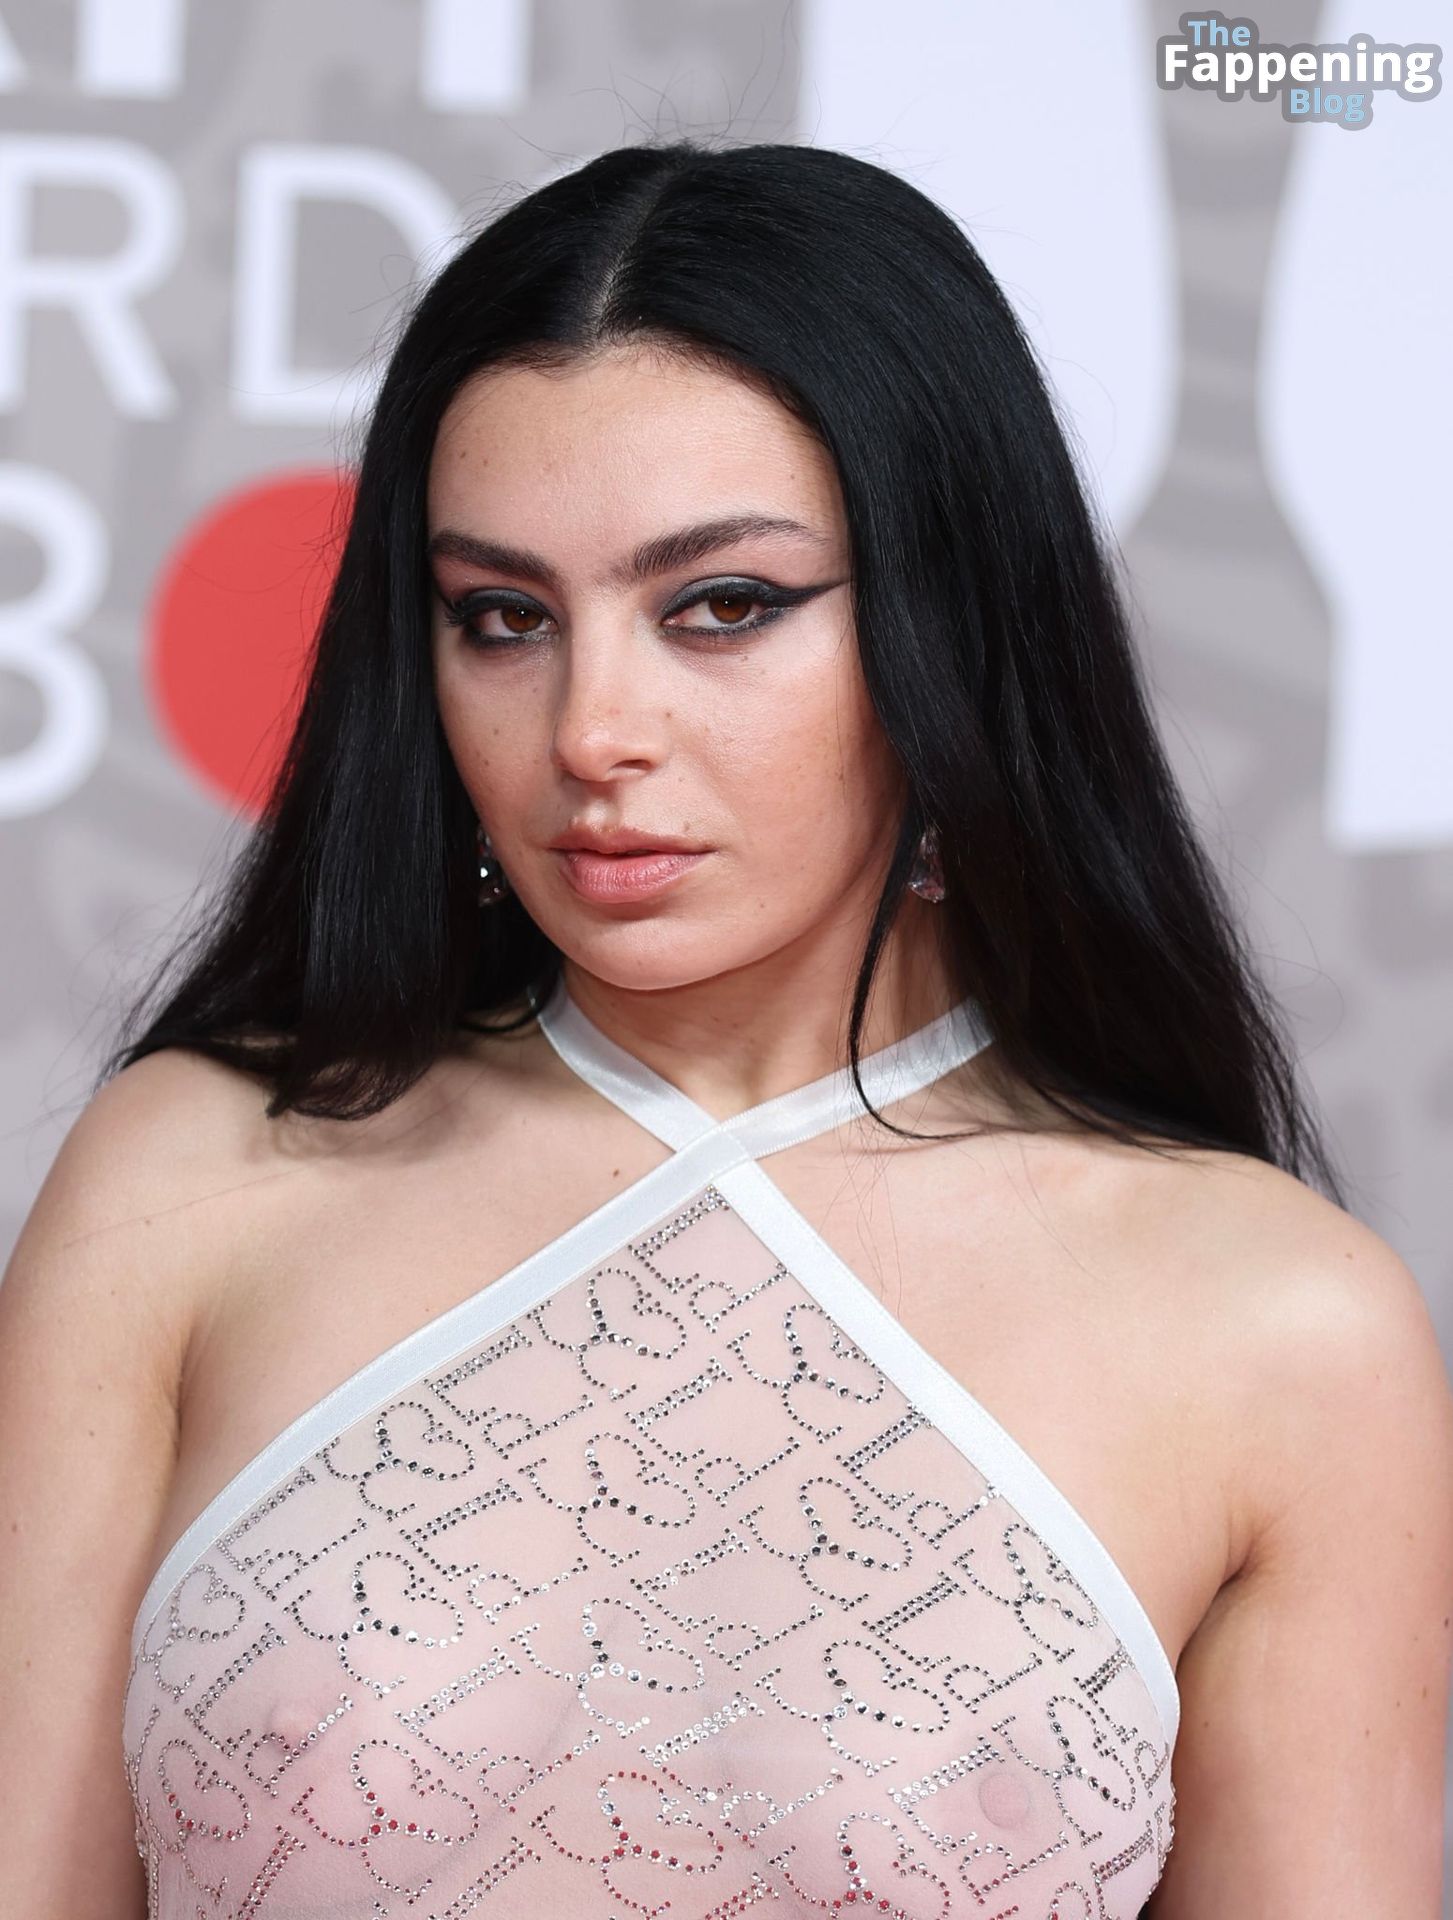 Charli-XCX-See-Through-Nudity-The-Fappening-Blog-18.jpg